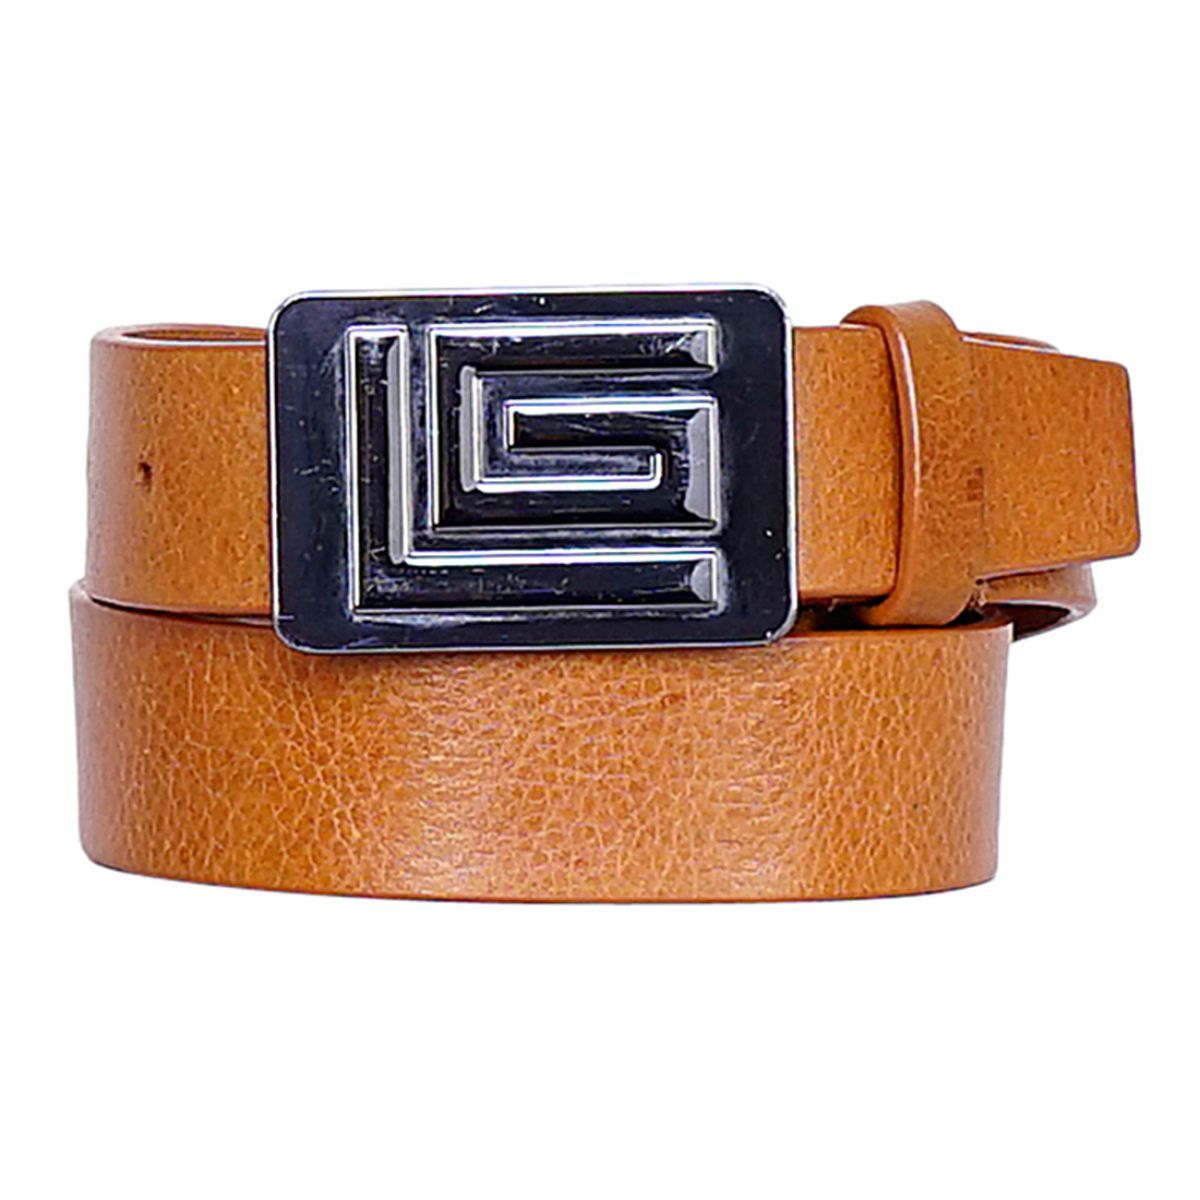 Justanned Men Tan Real Leather Textured Belt (32)